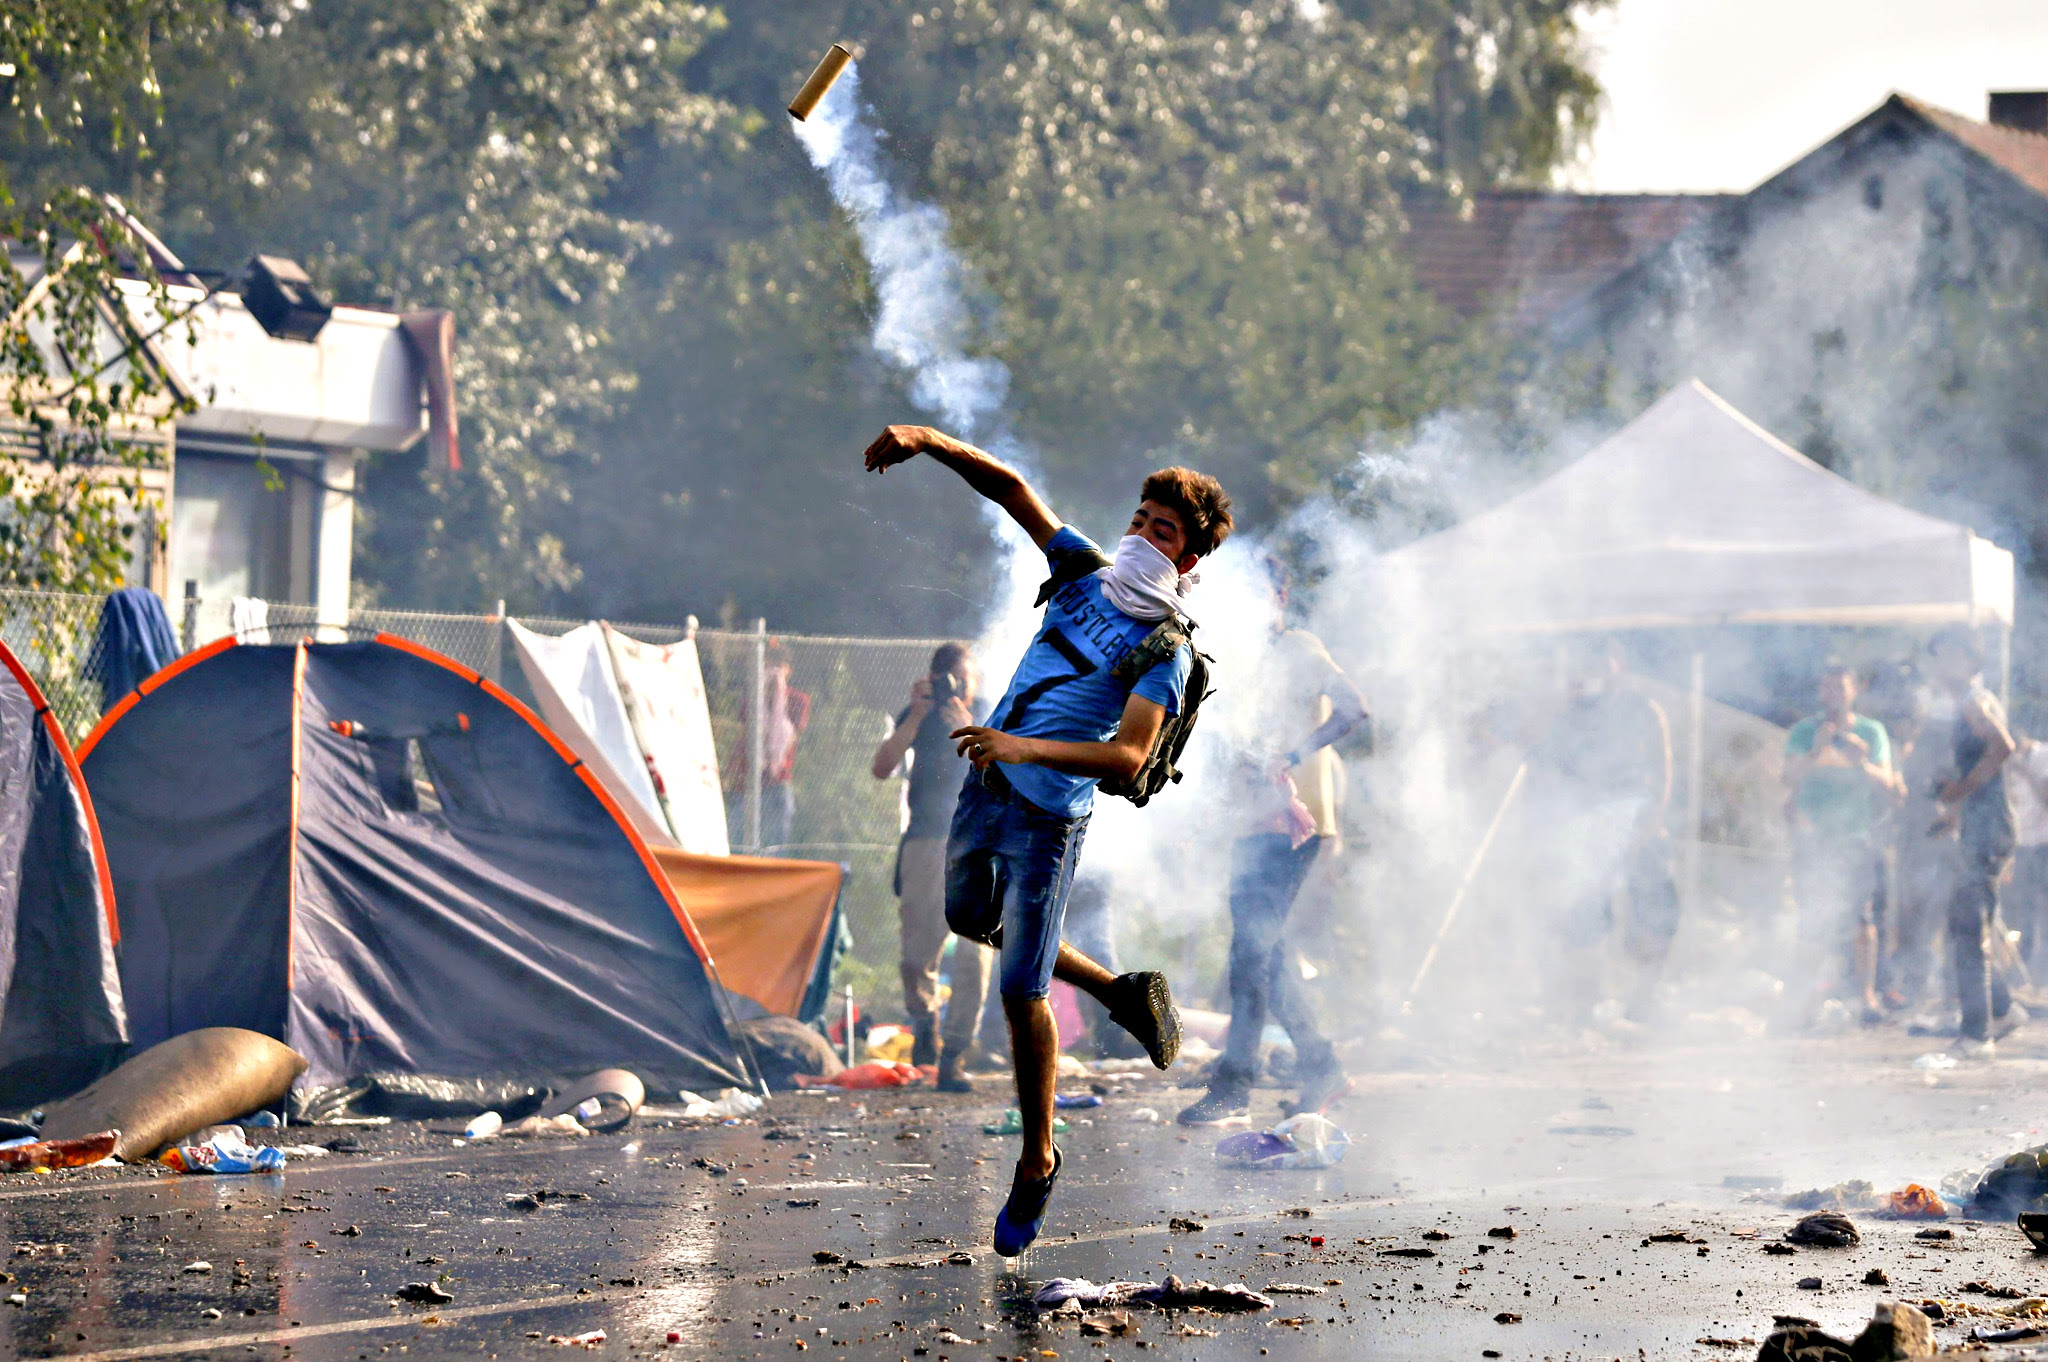 A migrant protests as Hungarian riot police fires tear gas and water cannon at the border crossing with Serbia in Roszke...A migrant protests as Hungarian riot police fires tear gas and water cannon at the border crossing with Serbia in Roszke, Hungary September 16, 2015. Hungarian police fired tear gas and water cannon at protesting migrants demanding they be allowed to enter from Serbia on Wednesday on the second day of a border crackdown